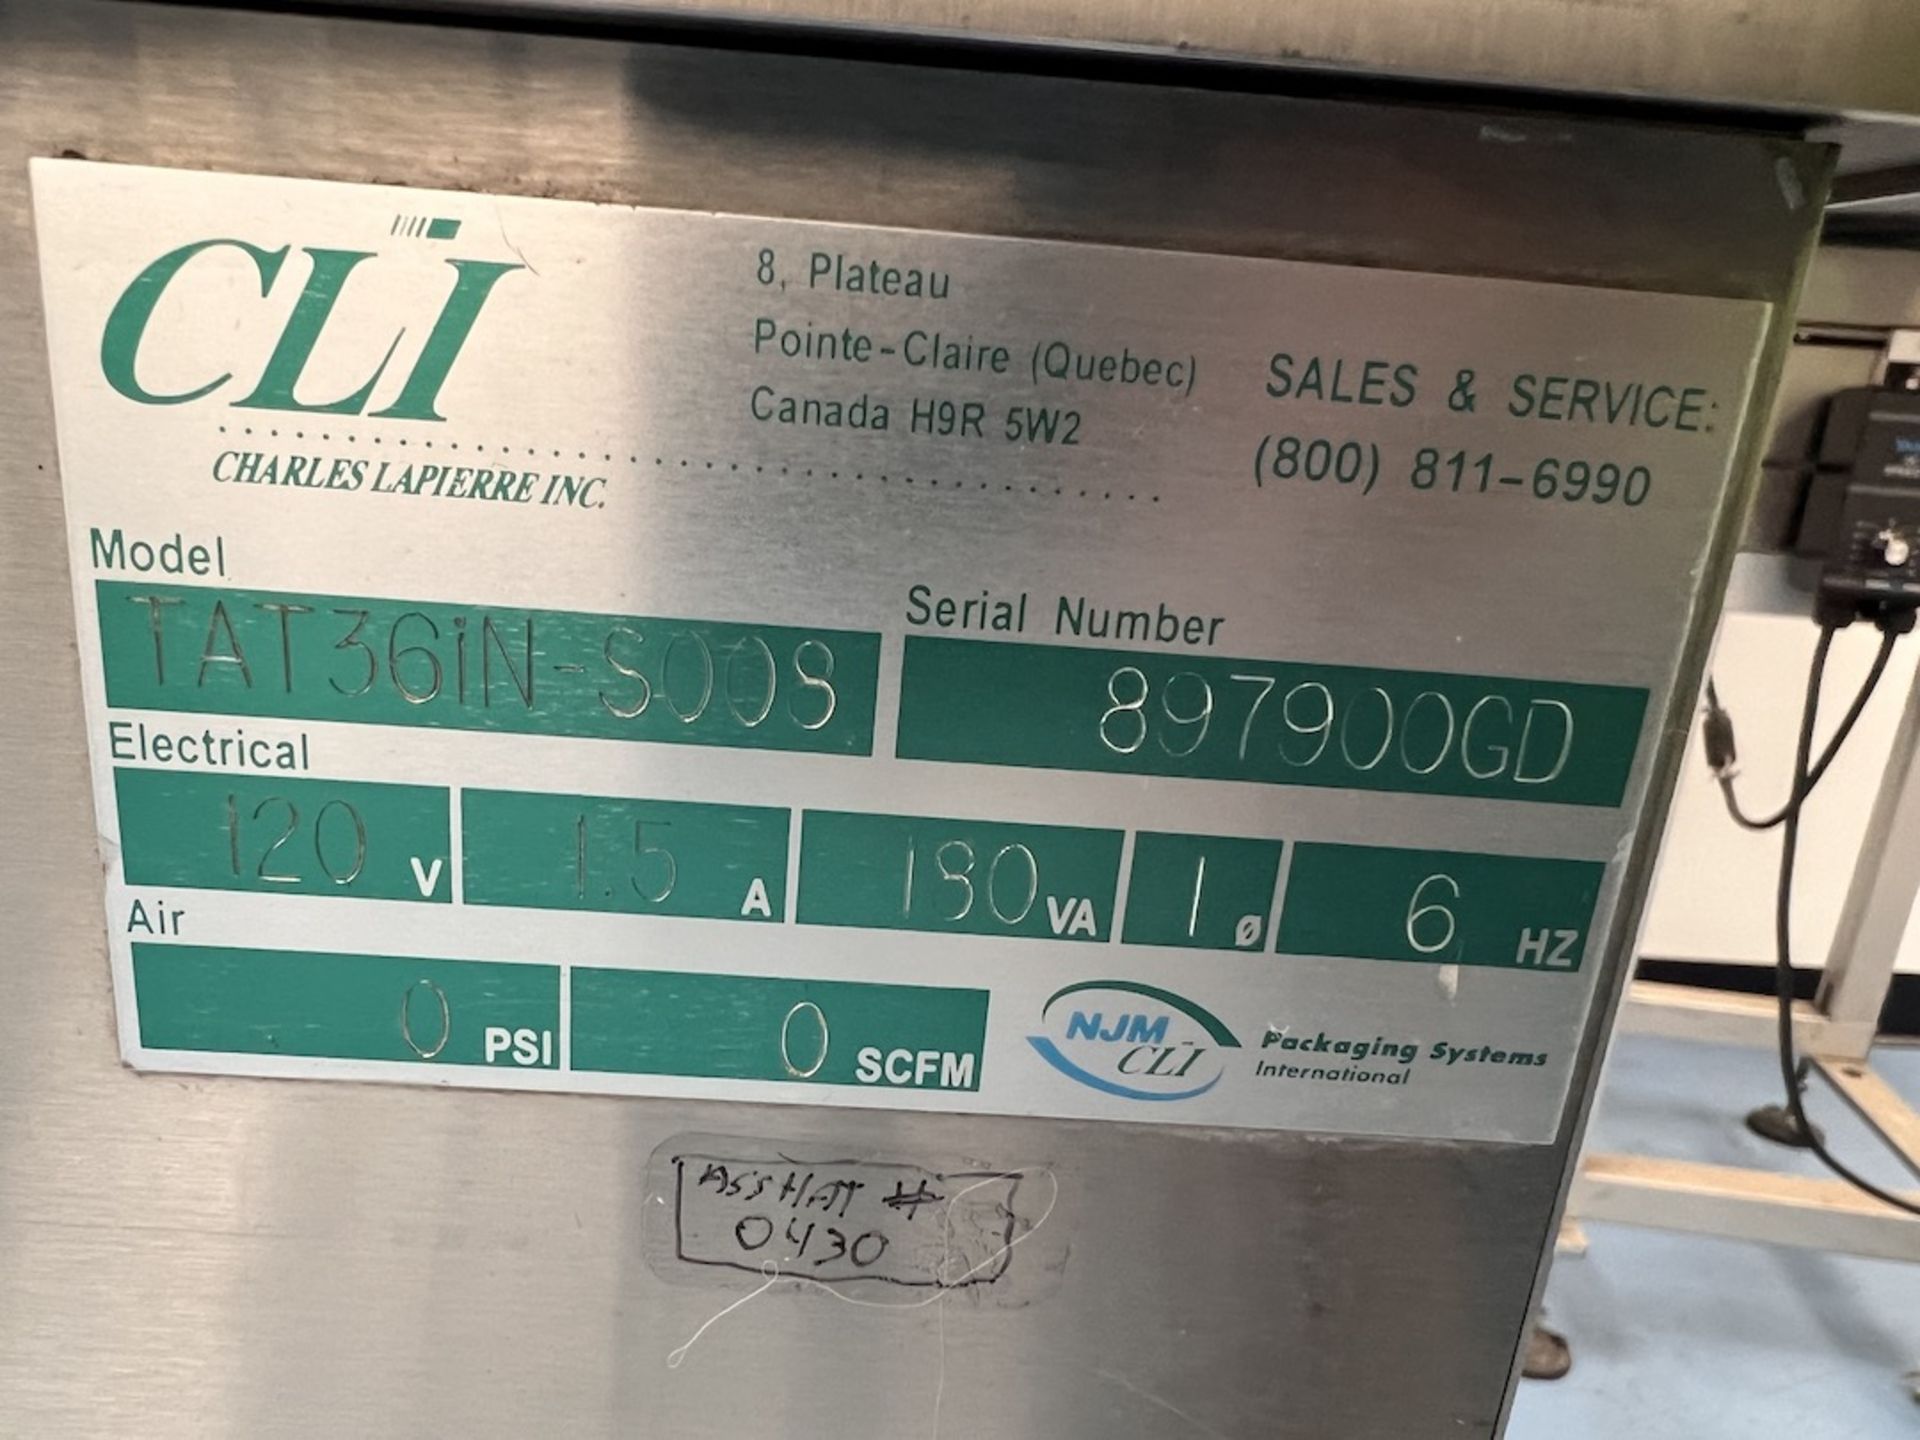 CLI ROTARY S/S ACCUMULATION TABLE, MODEL TAT36IN-S008, S/N 89700GD, 120 V - Image 3 of 4